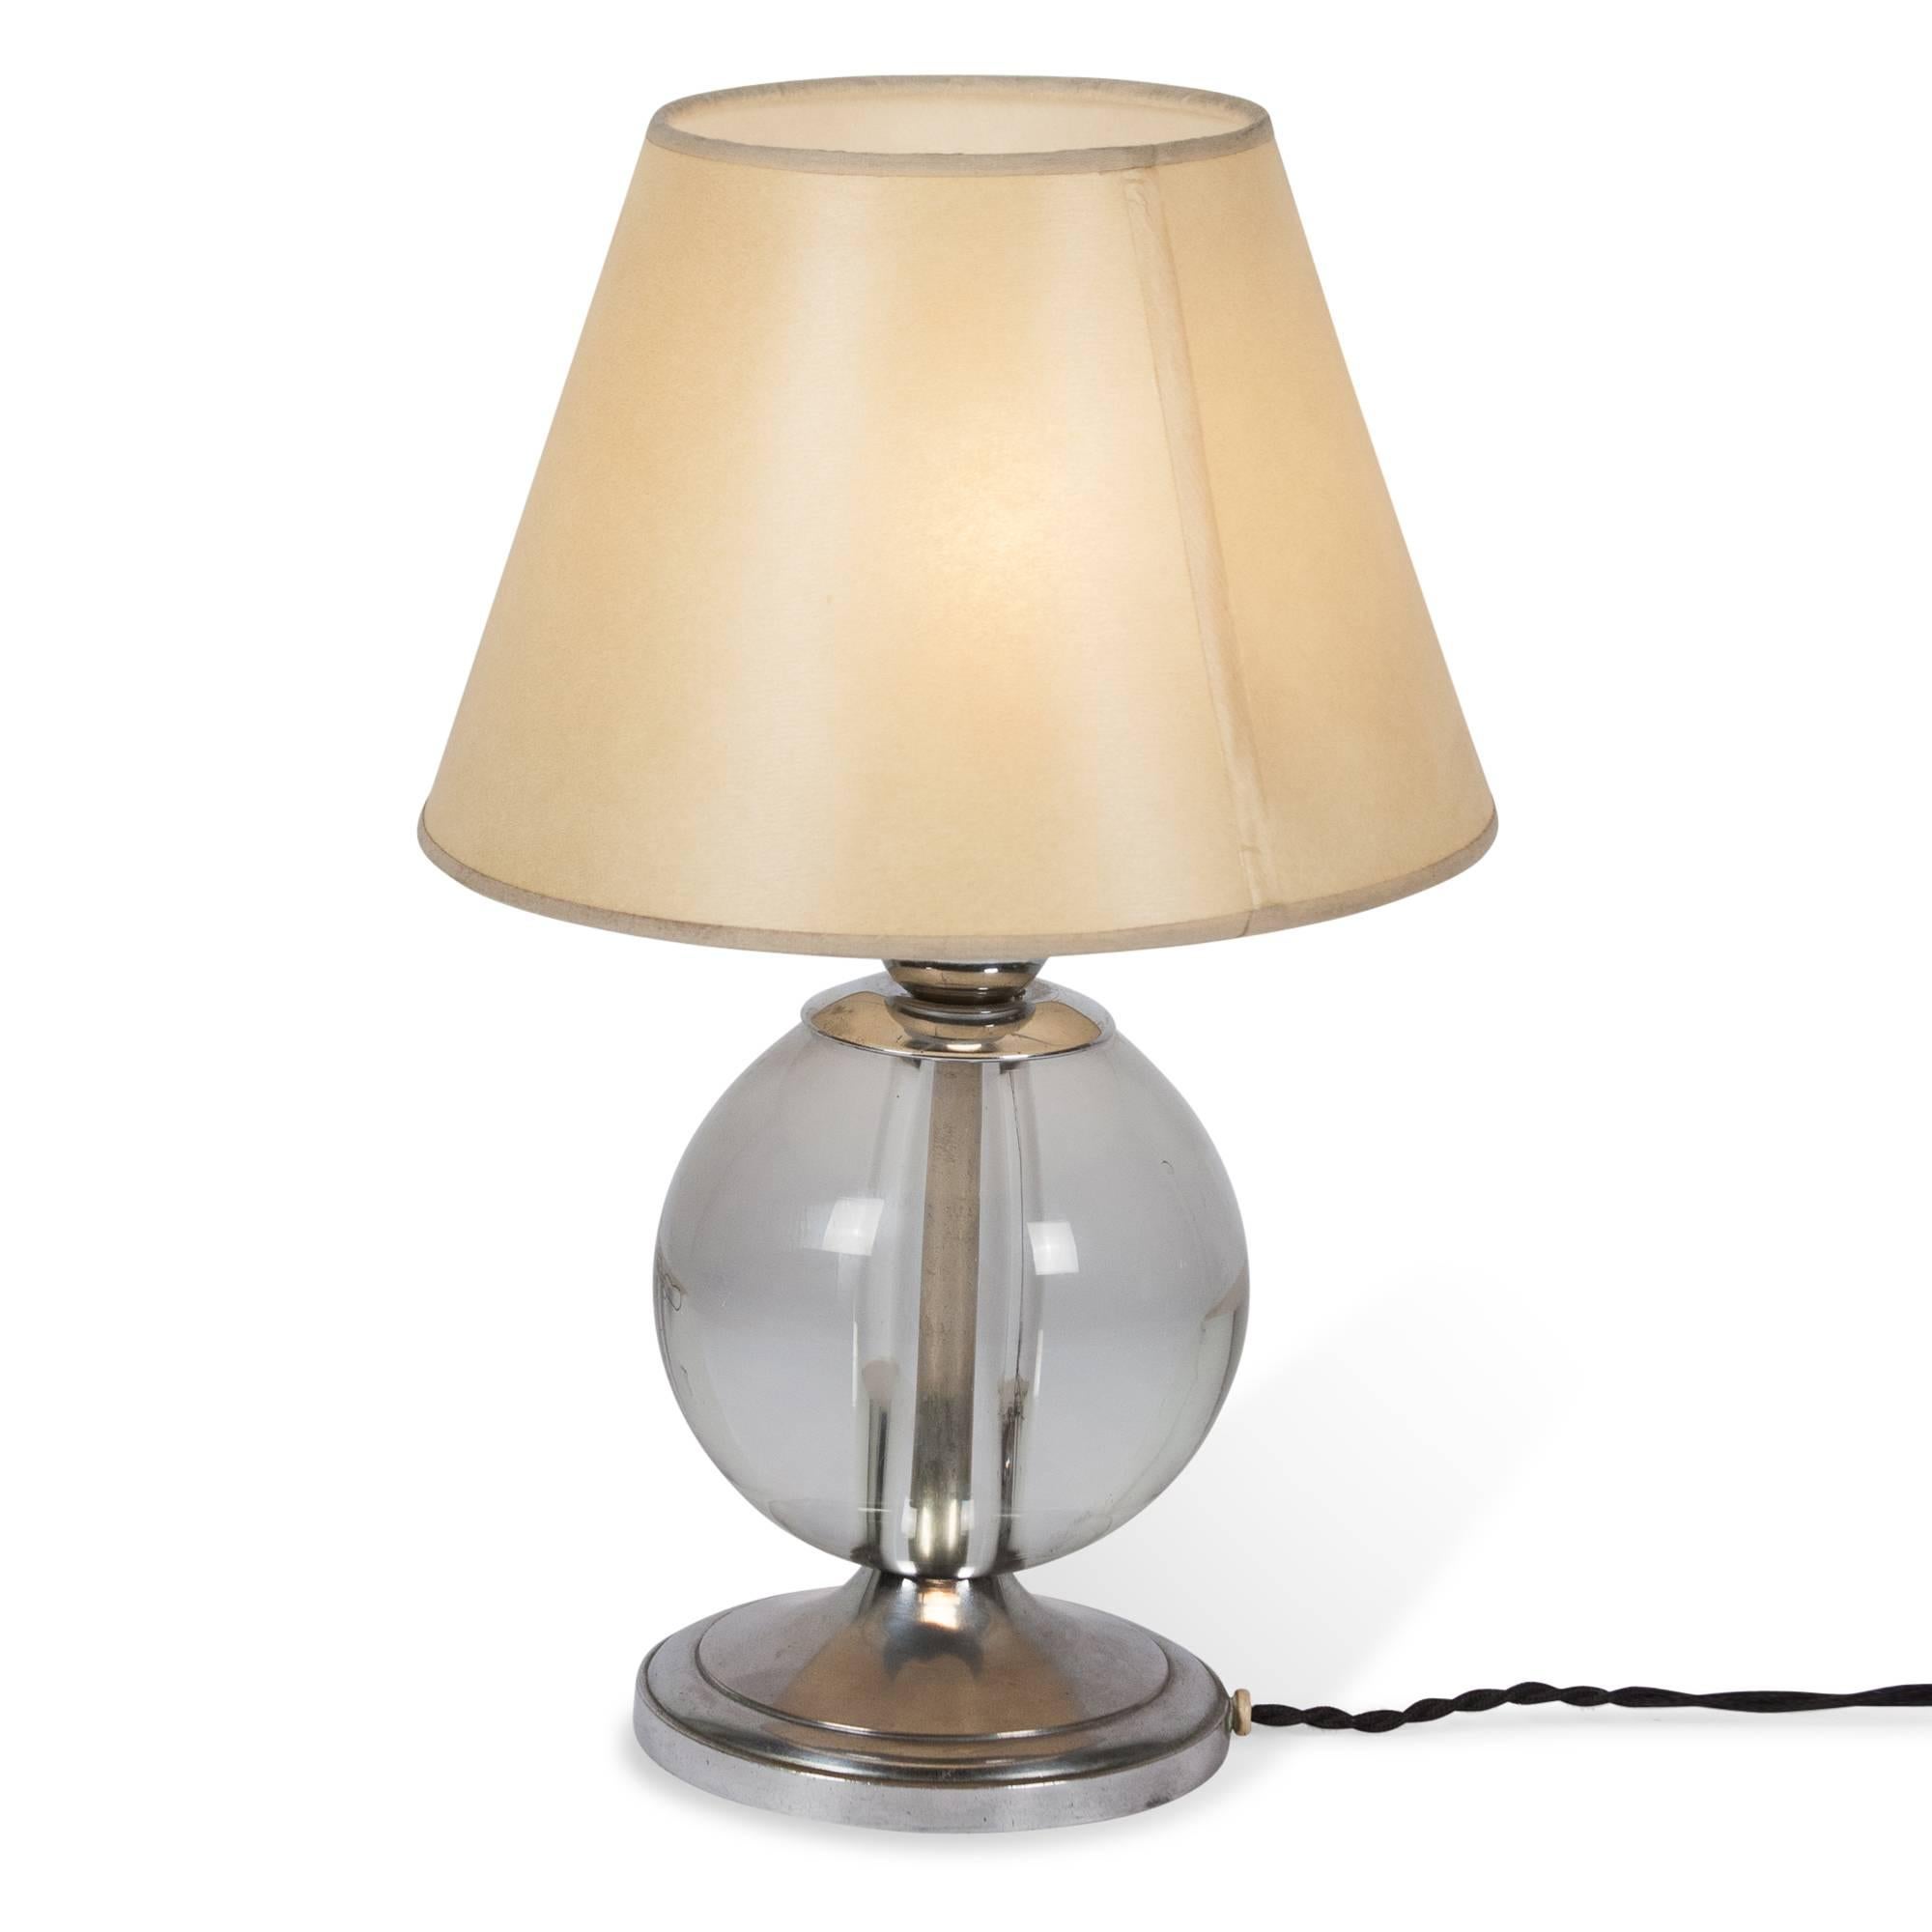 Crystal ball lamp, the ball mounted on a nickel base, with a custom paper shade, attributed to Jacques Adnet, French, 1930s. Measures: 5.5” D base, 14” H, 9” D shade at widest. 